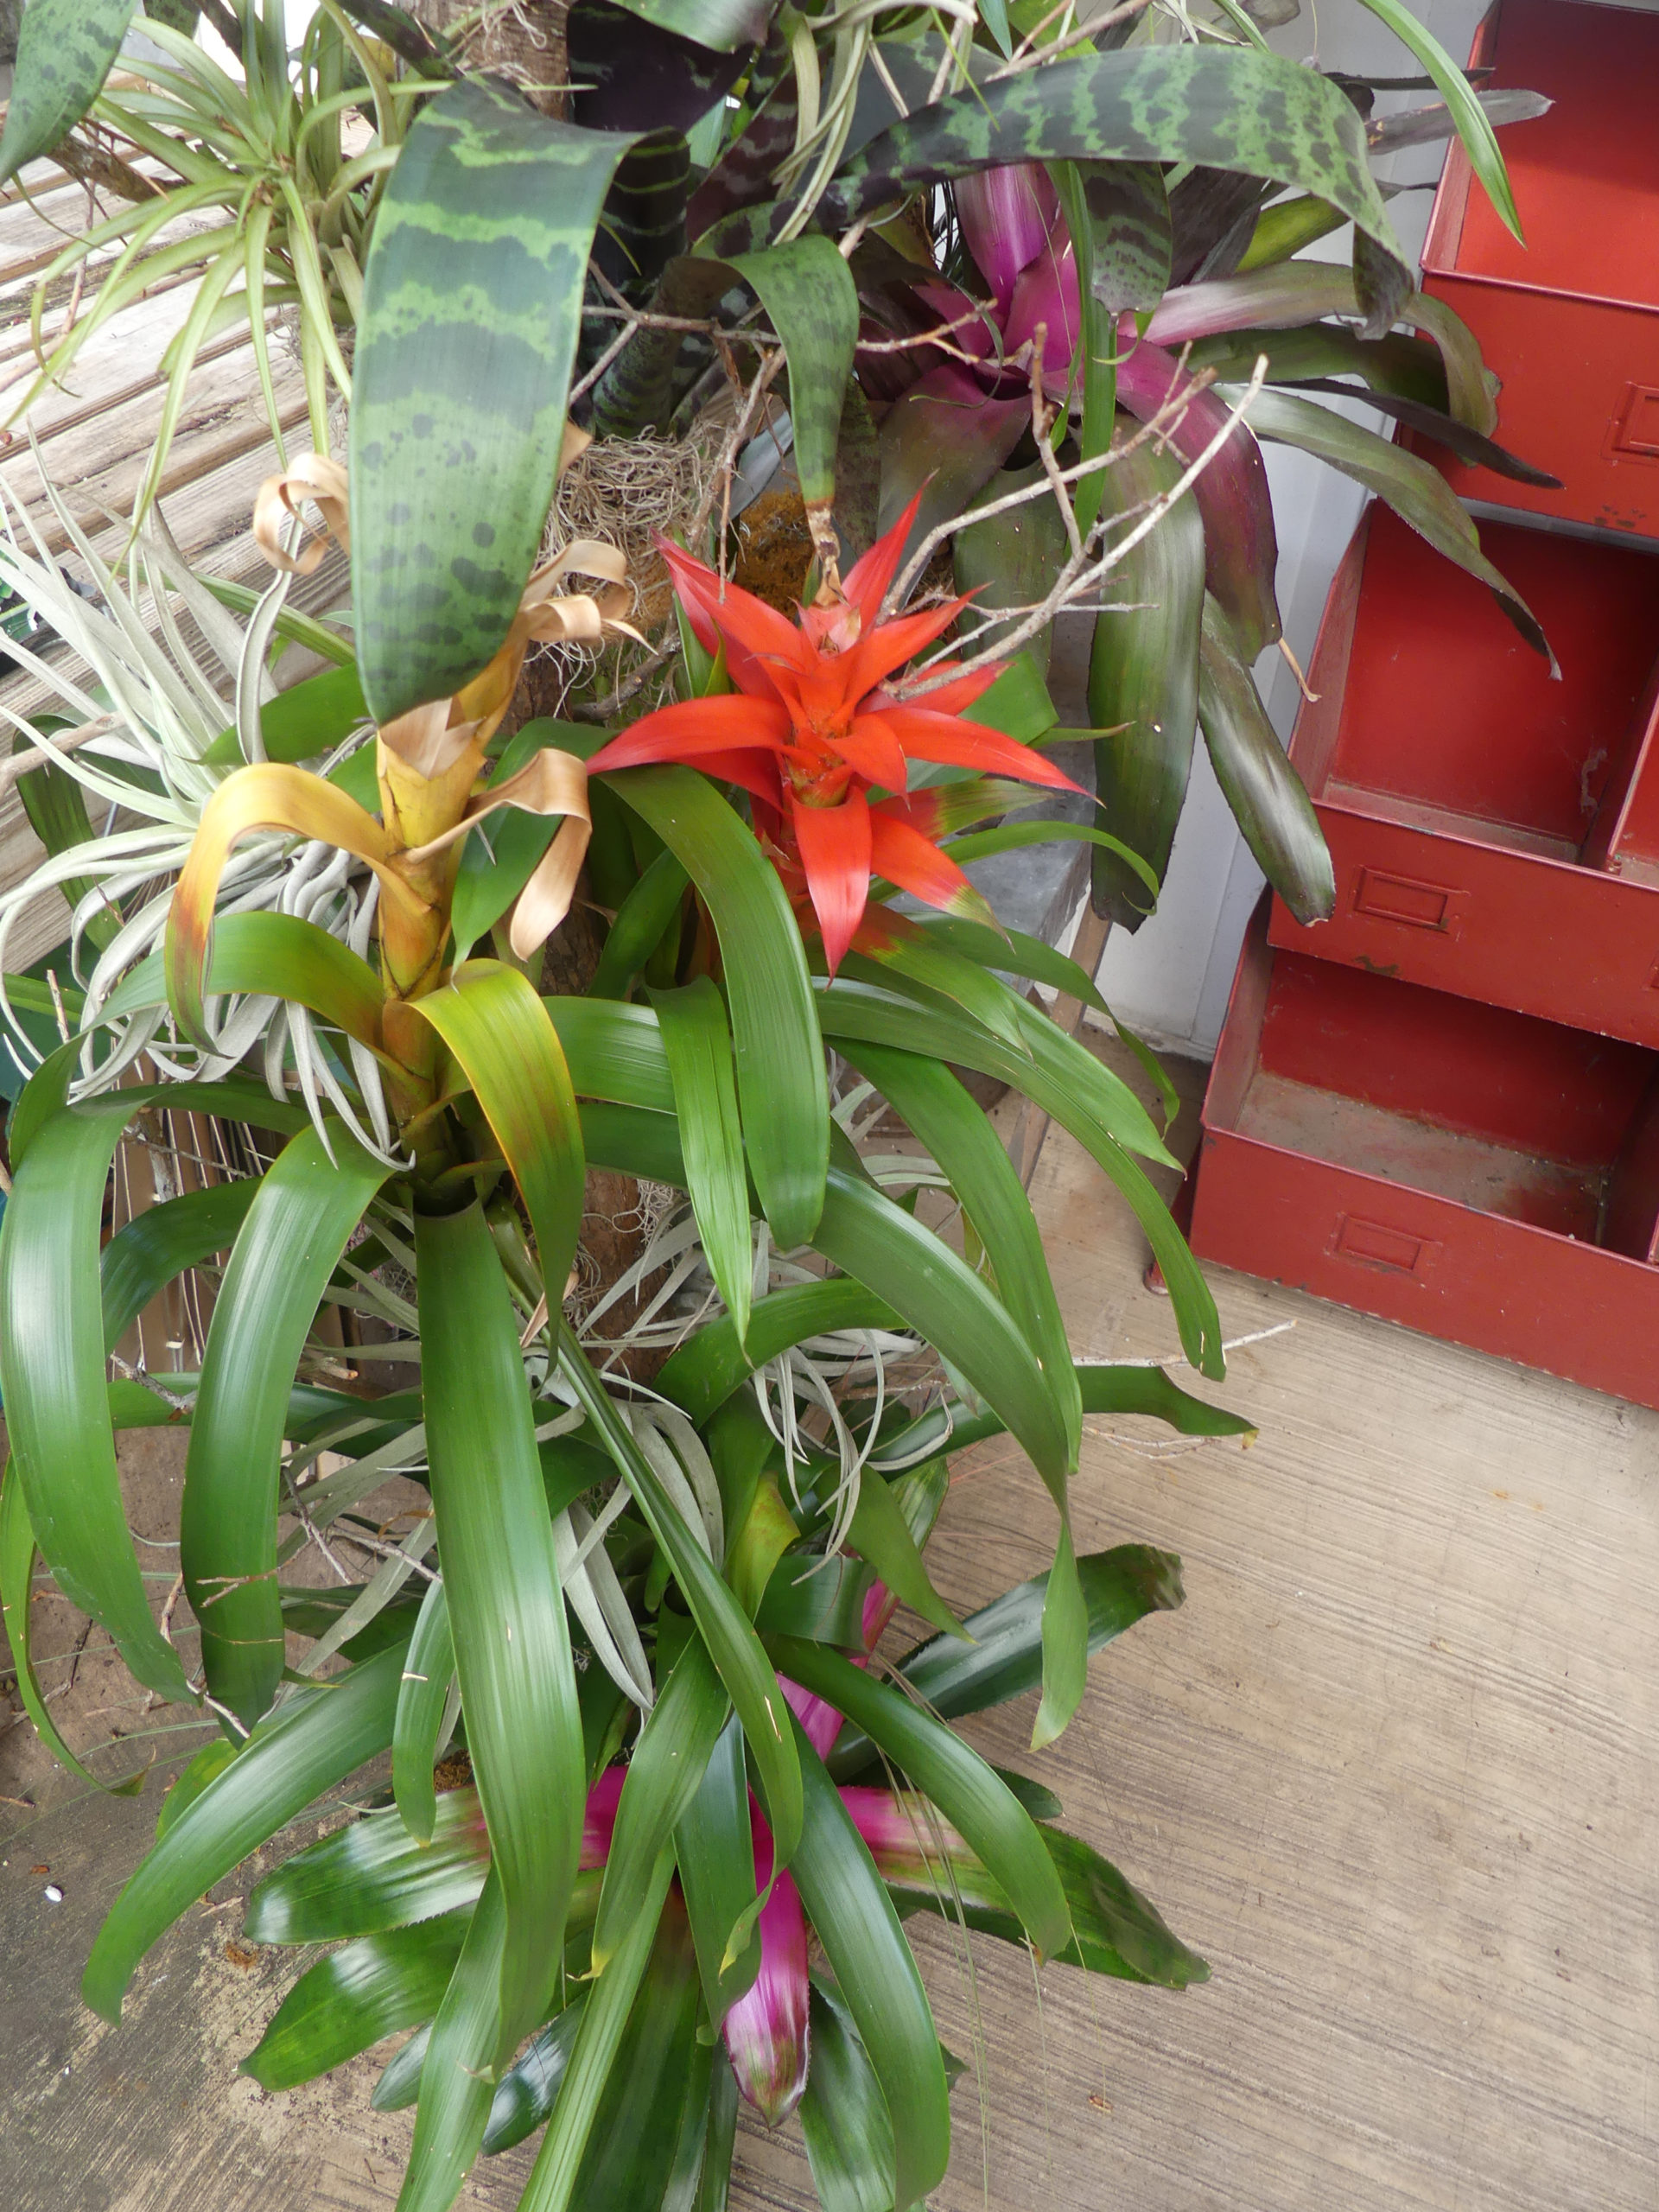 Bromeliads and “air plants” can have dramatic flowers and require little care other than moderately humid air and water in just the right spot. They look best when massed like these on a wooden totem or post. ANDREW MESSINGER